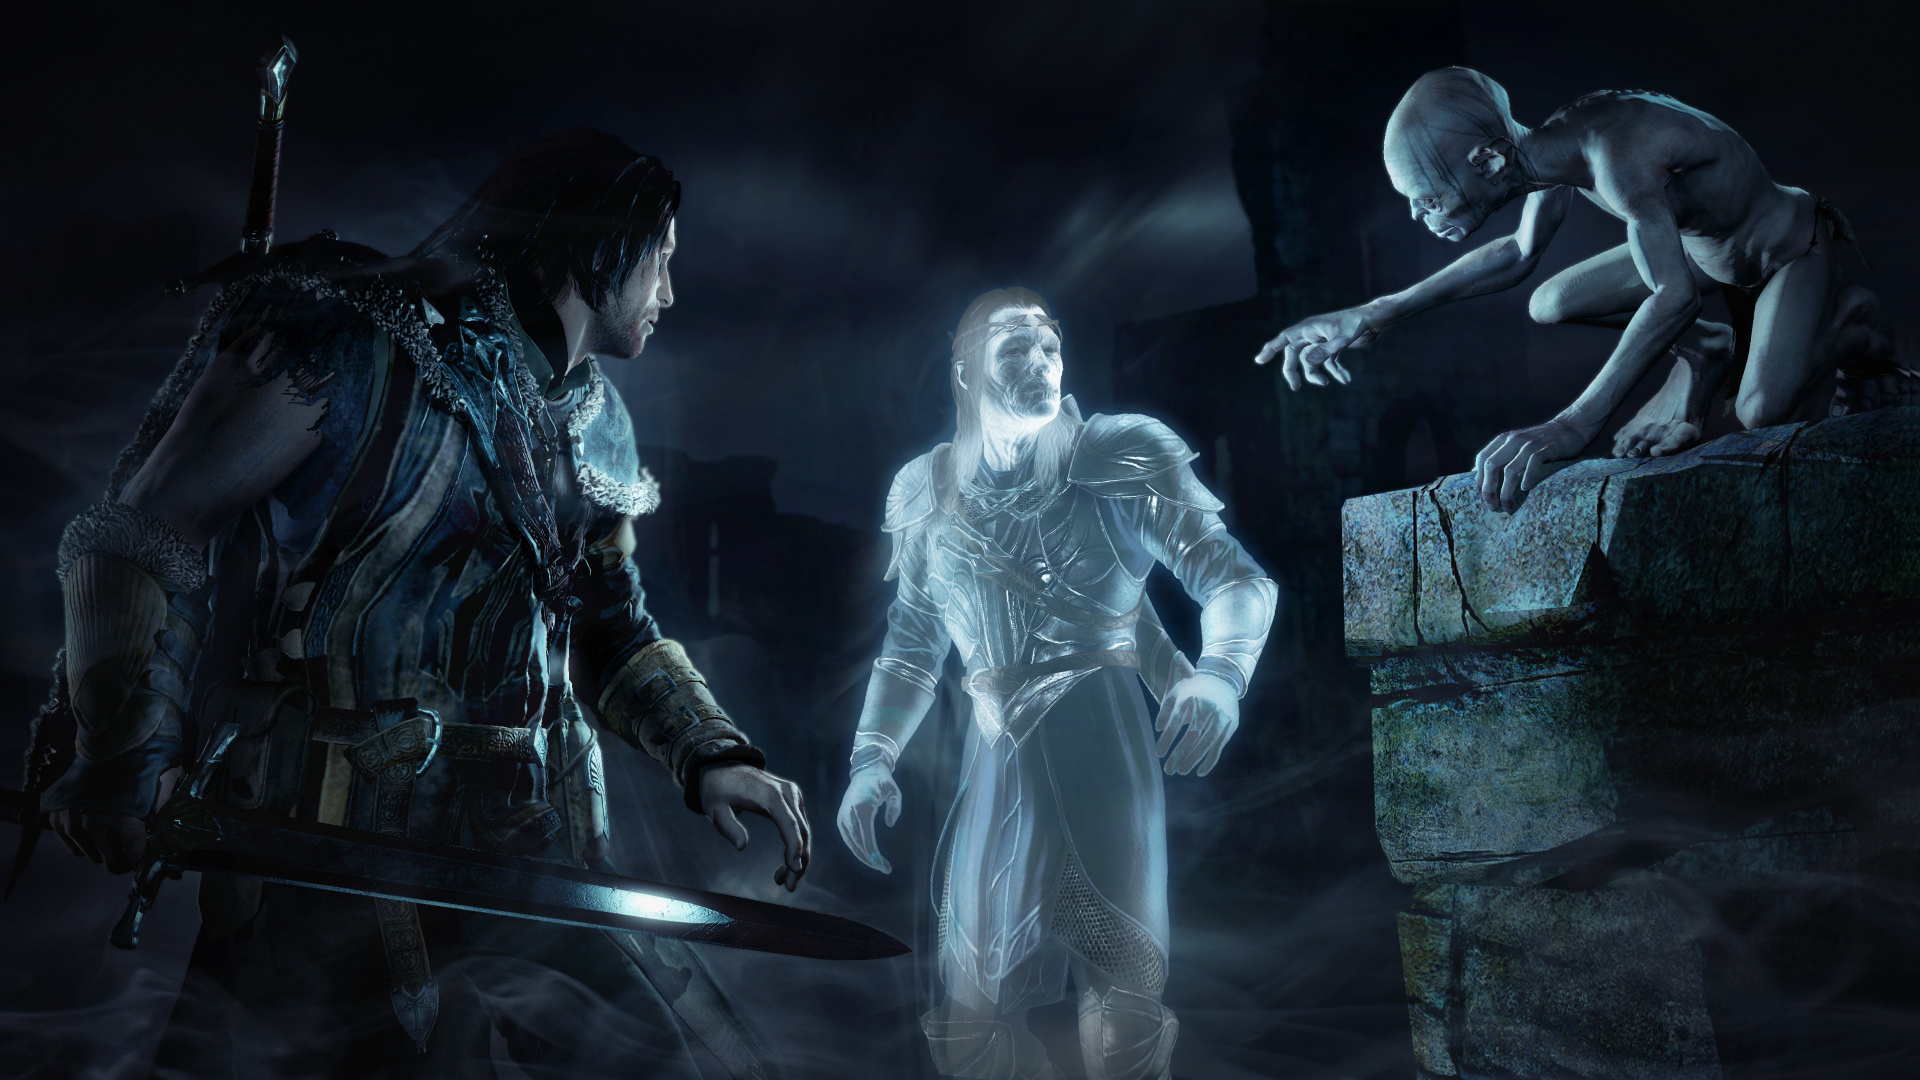 Middle-earth: Shadow of Mordor Review - Gaming Pastime